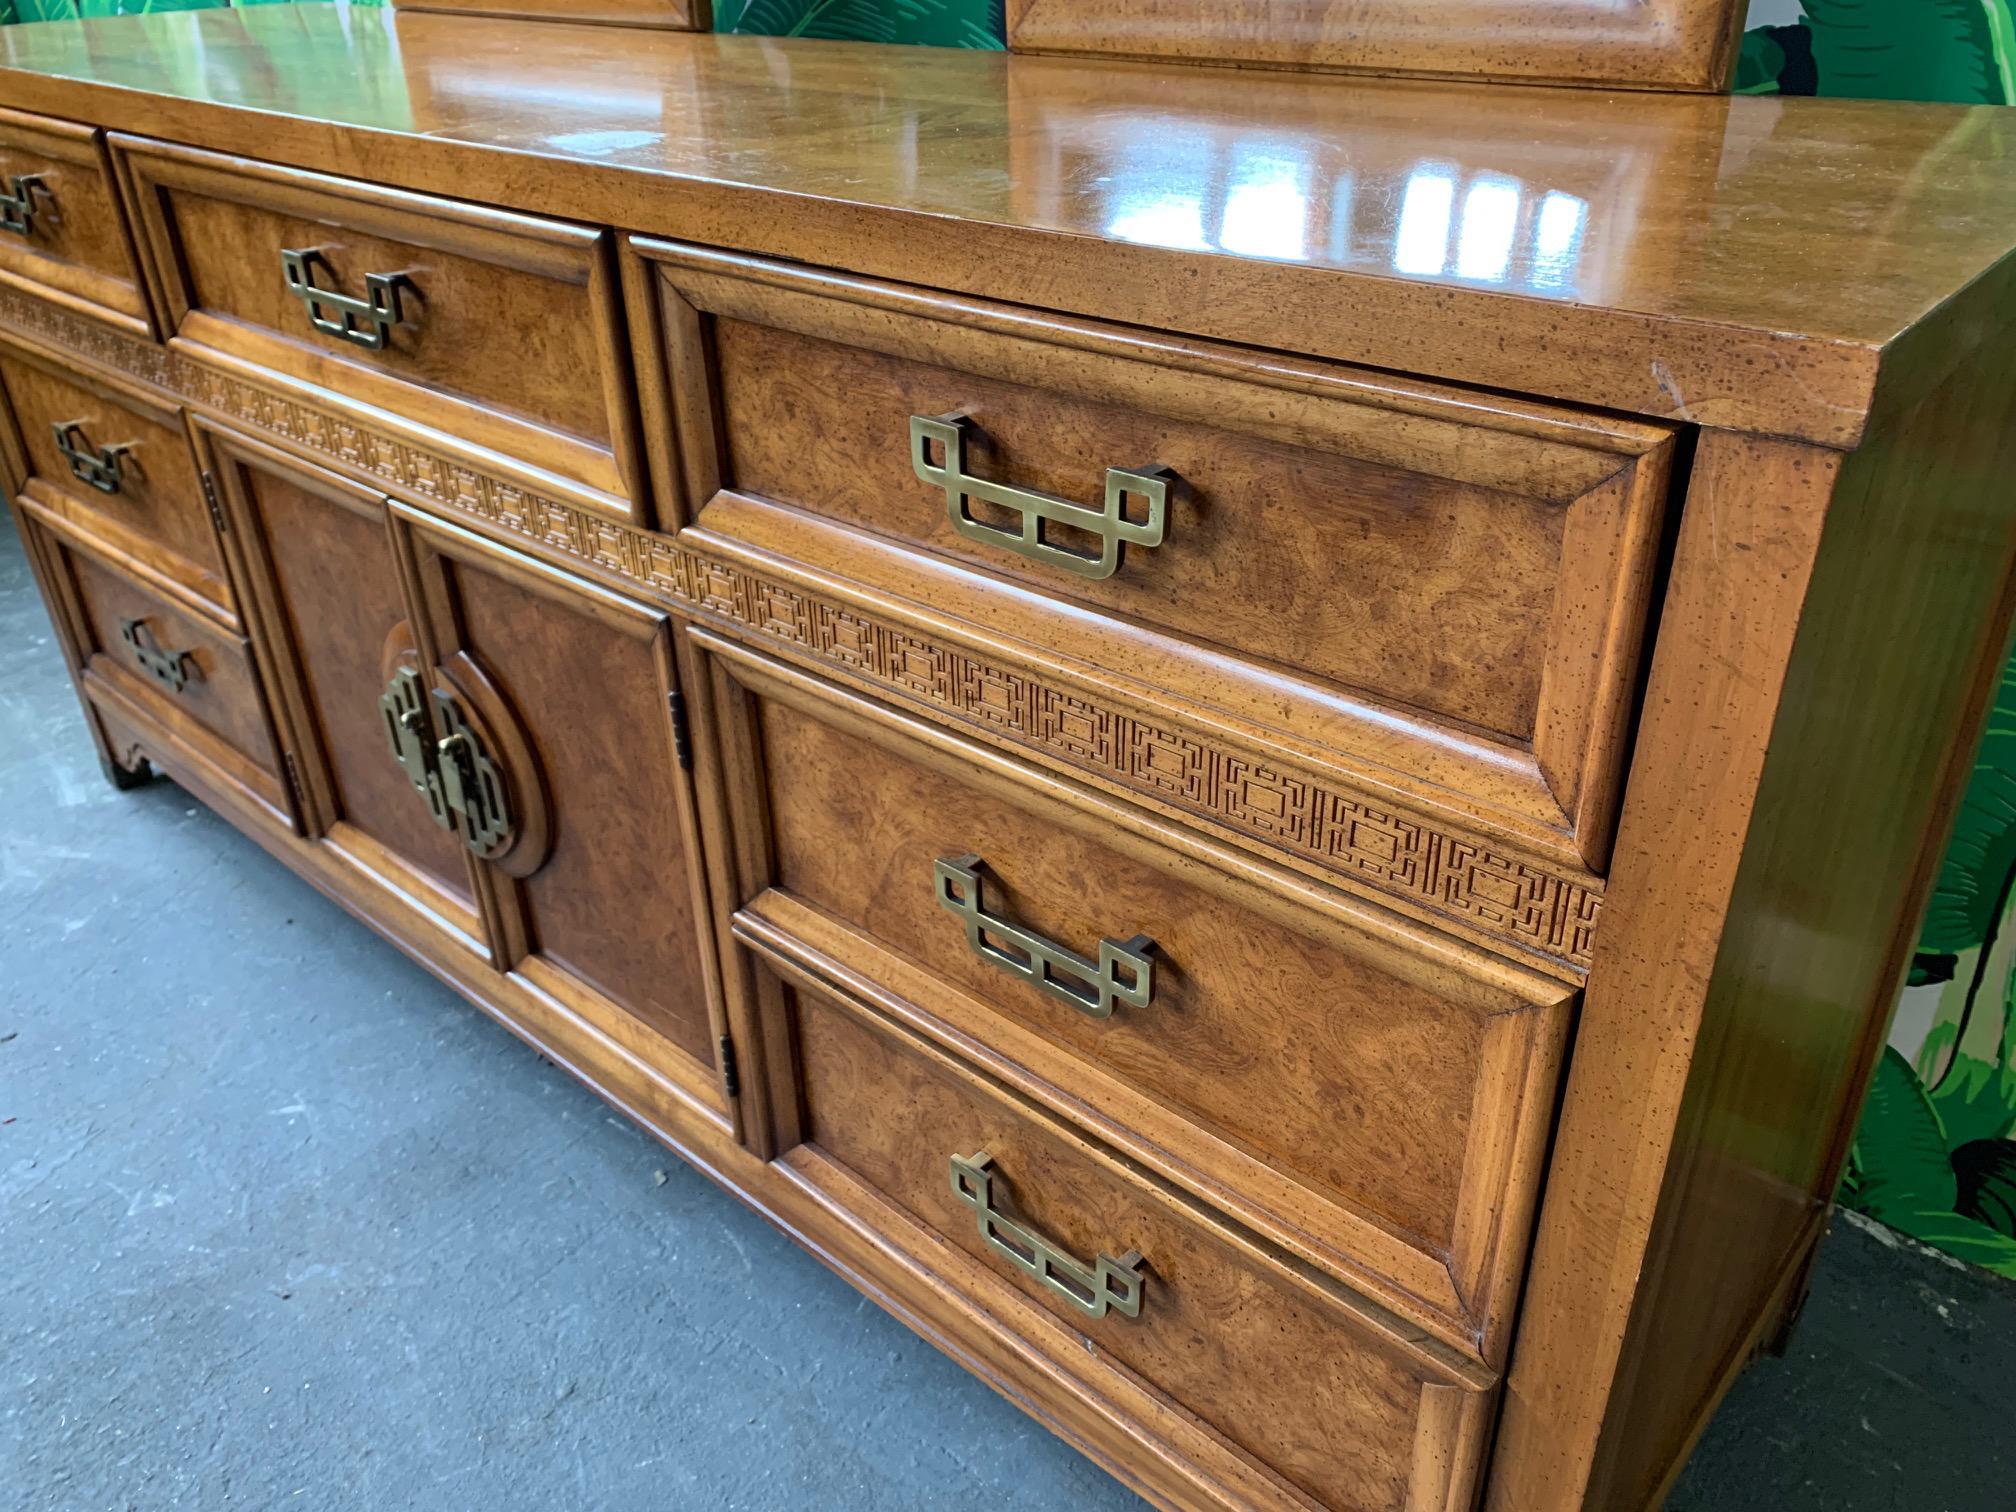 Midcentury dresser by Henry Link from the Mandarin collection. Features burl drawer faces, brass hardware, and matching mirrors. Very good vintage condition with only very minor signs of age appropriate wear.